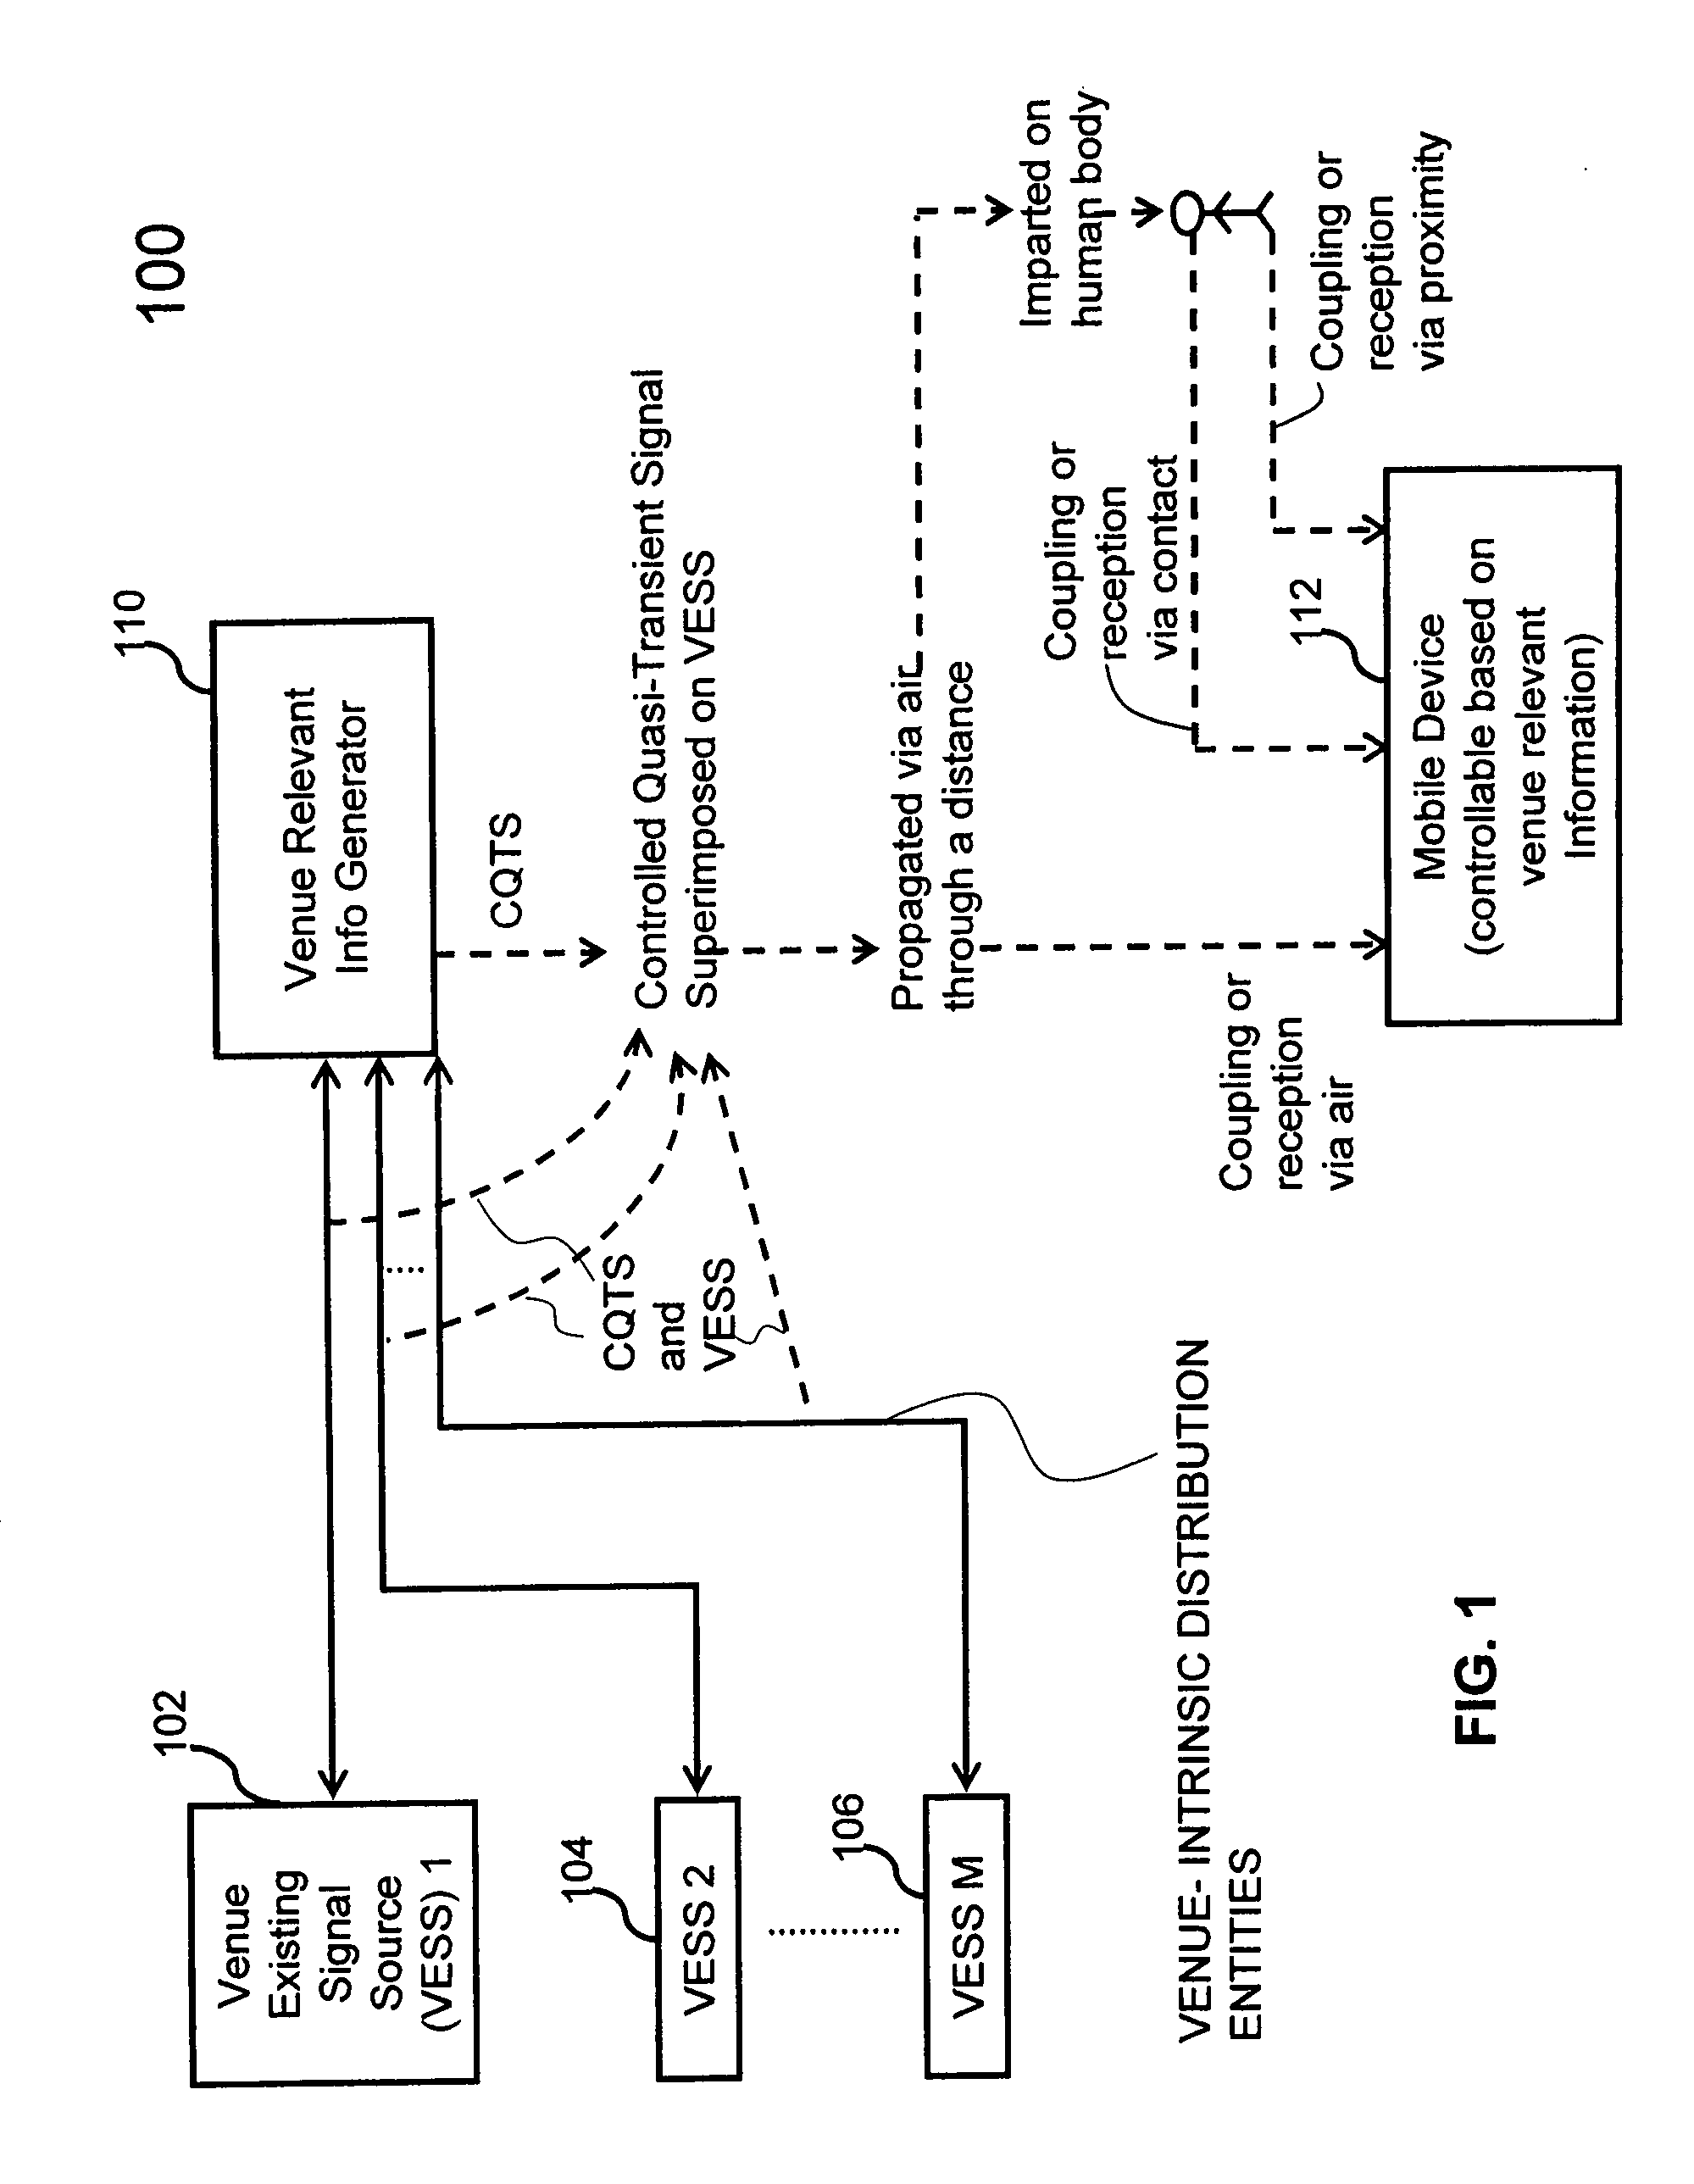 Venue-based device control and determination